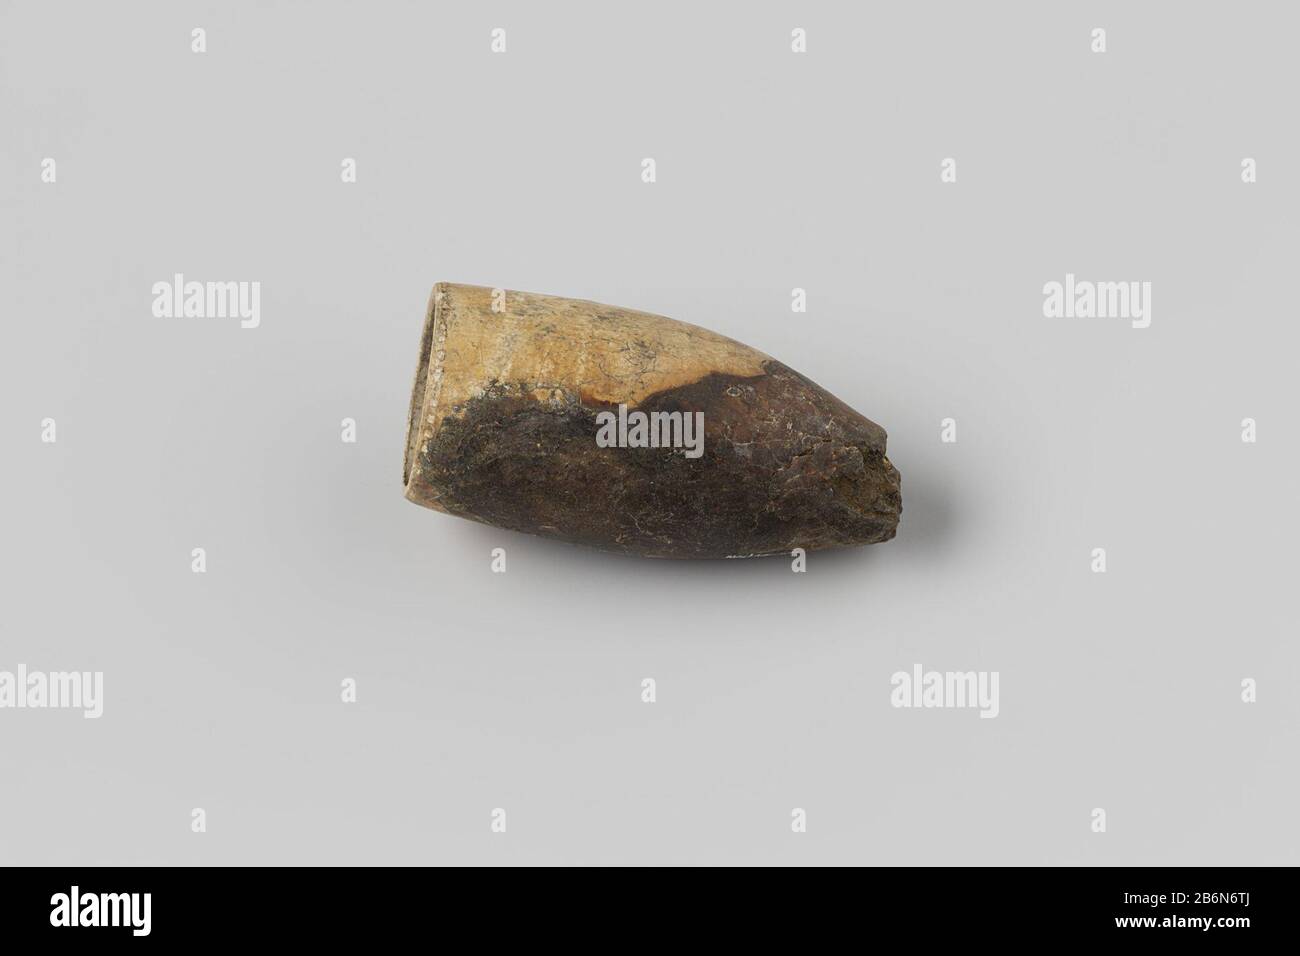 Tuyau, bol, heelmark illisible; fragment. Fabricant : anoniemPlaats fabrication: Nederland Dating: 1700 - in of voor 13-aug-1743 matériau: Pijpaarde Dimensions: L 4,3 cm. × d 2,1 cm. Date : 1743-08-13 - 1743-08-13 Banque D'Images